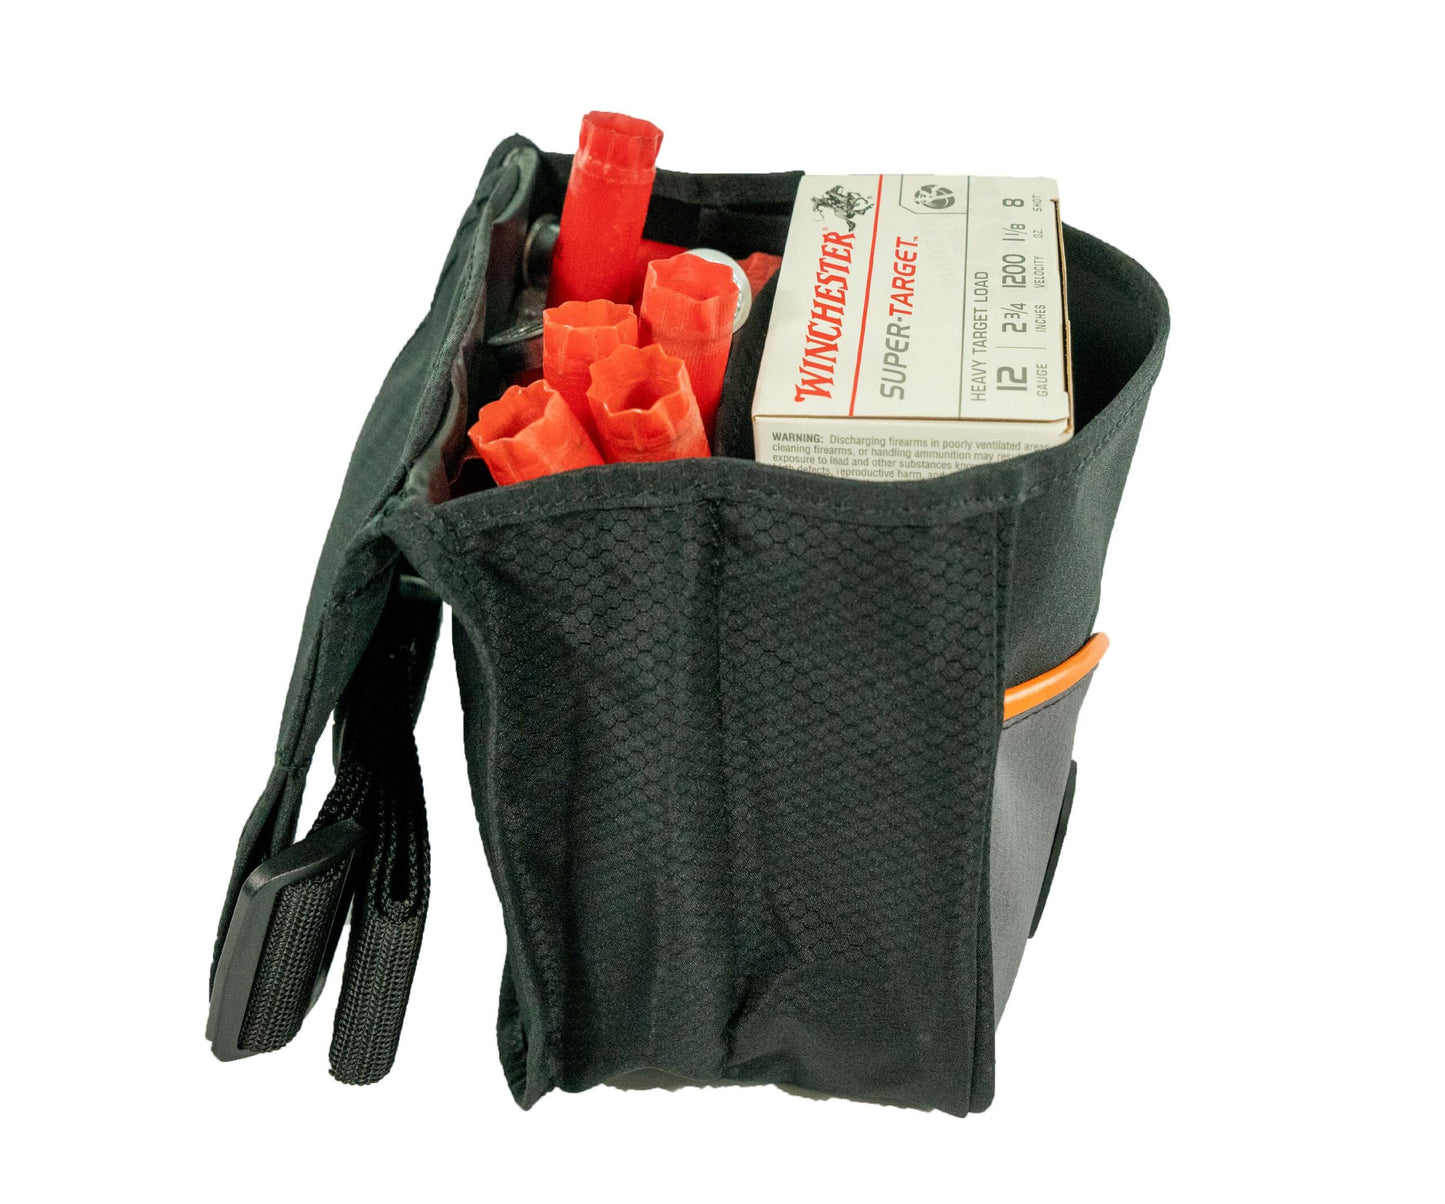 BA 430 Club Series Divided Shell Pouch with Belt